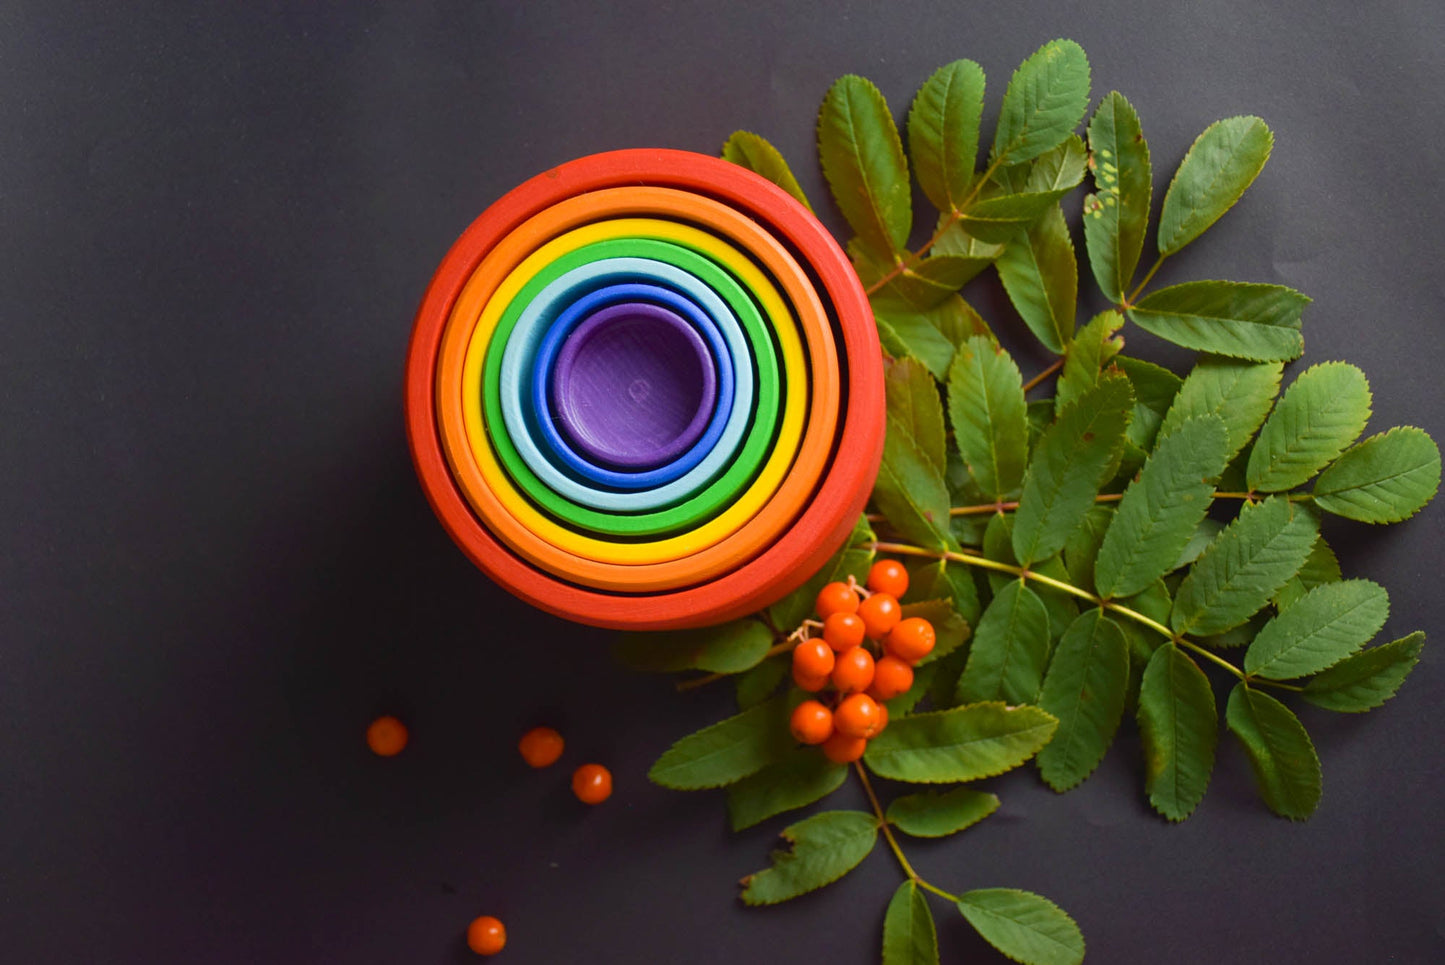 Wooden Nesting Rainbow Bowls Toy